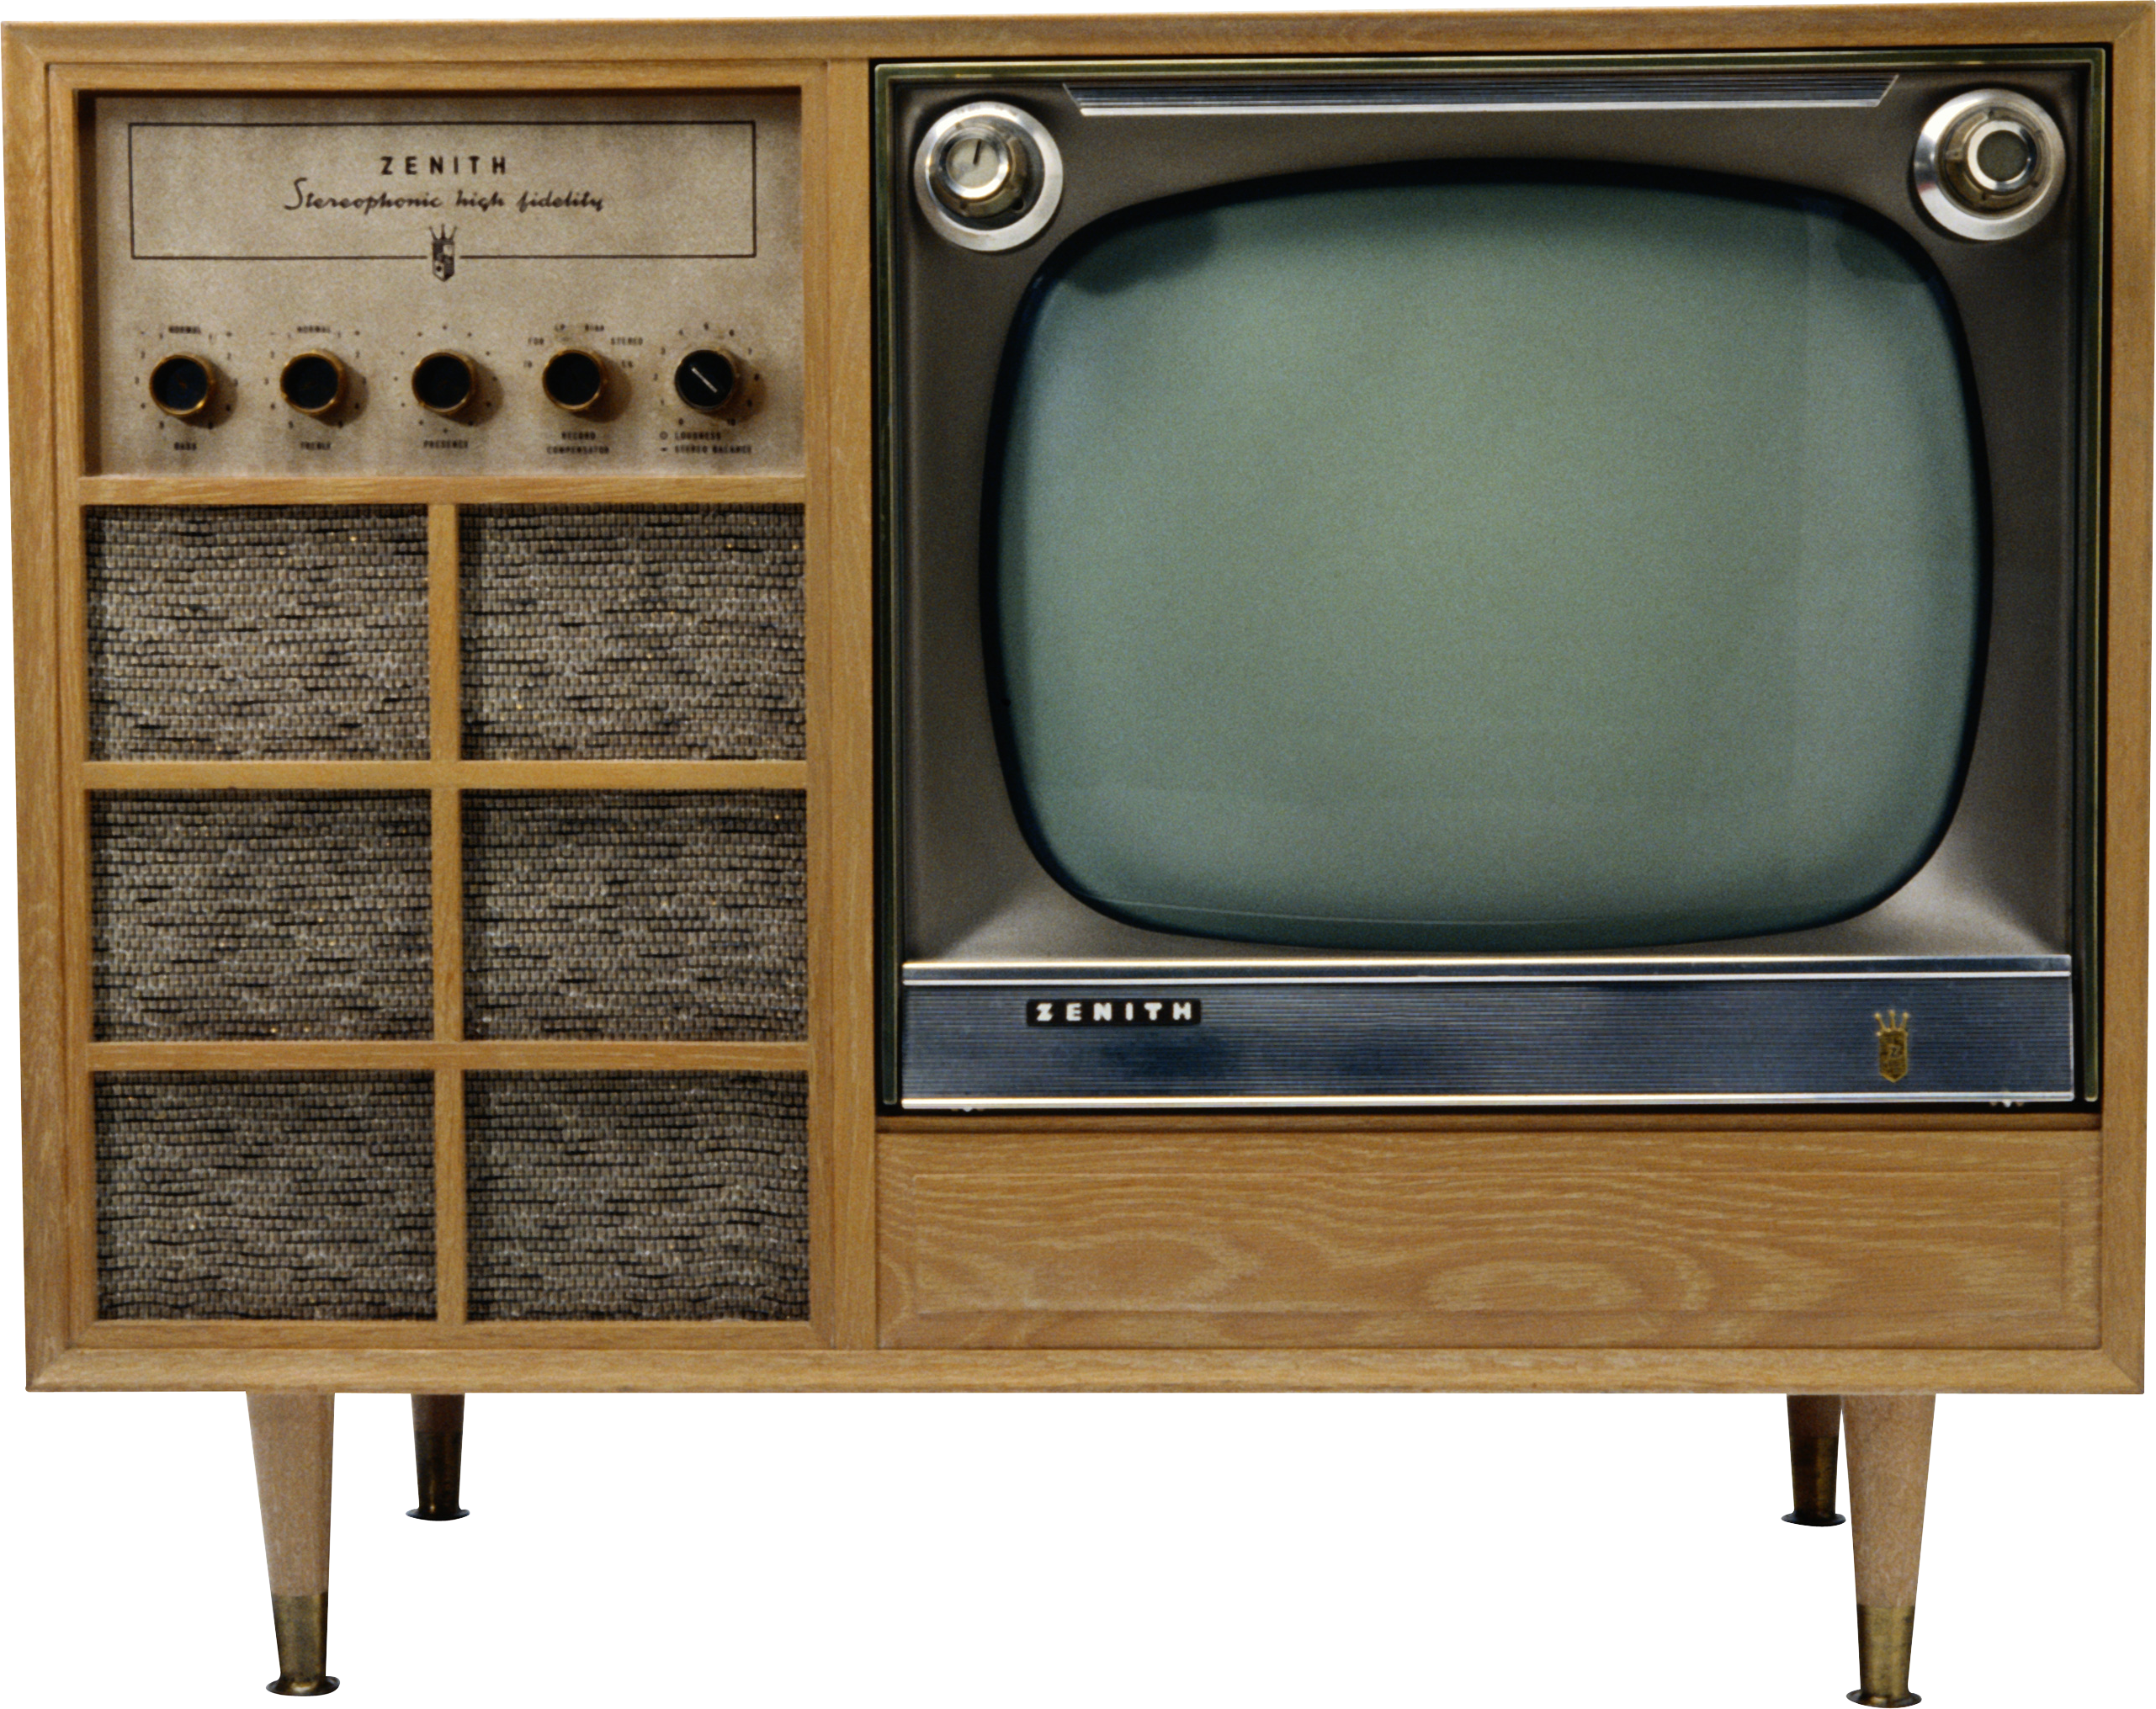 Old Tv Png